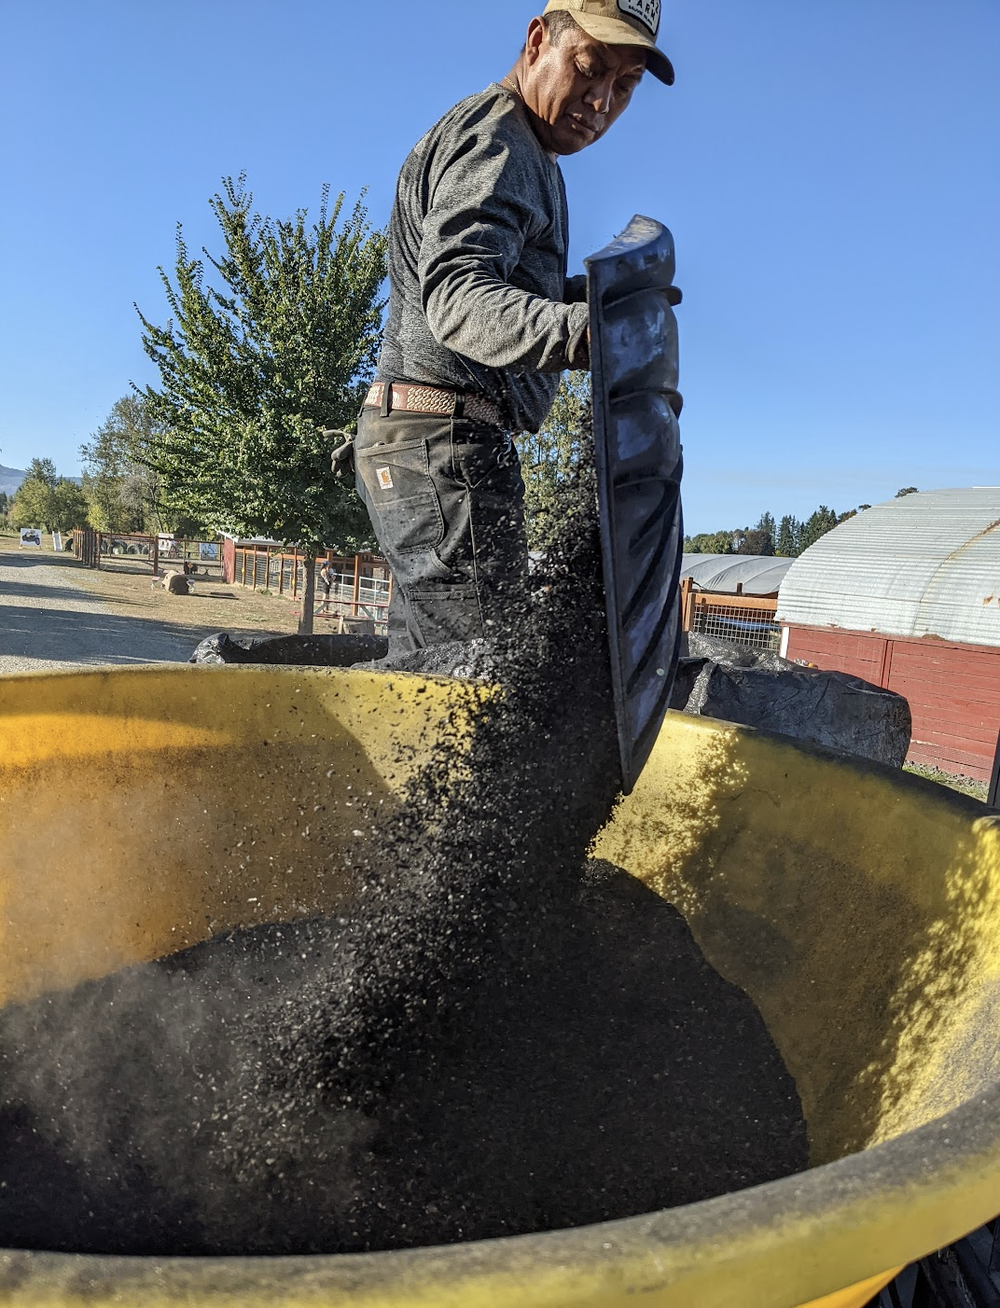 Luis spreading biochar into the fields. The dry weather gave us the opportunity to plant cover crops in all our fields this year, before it got too muddy.